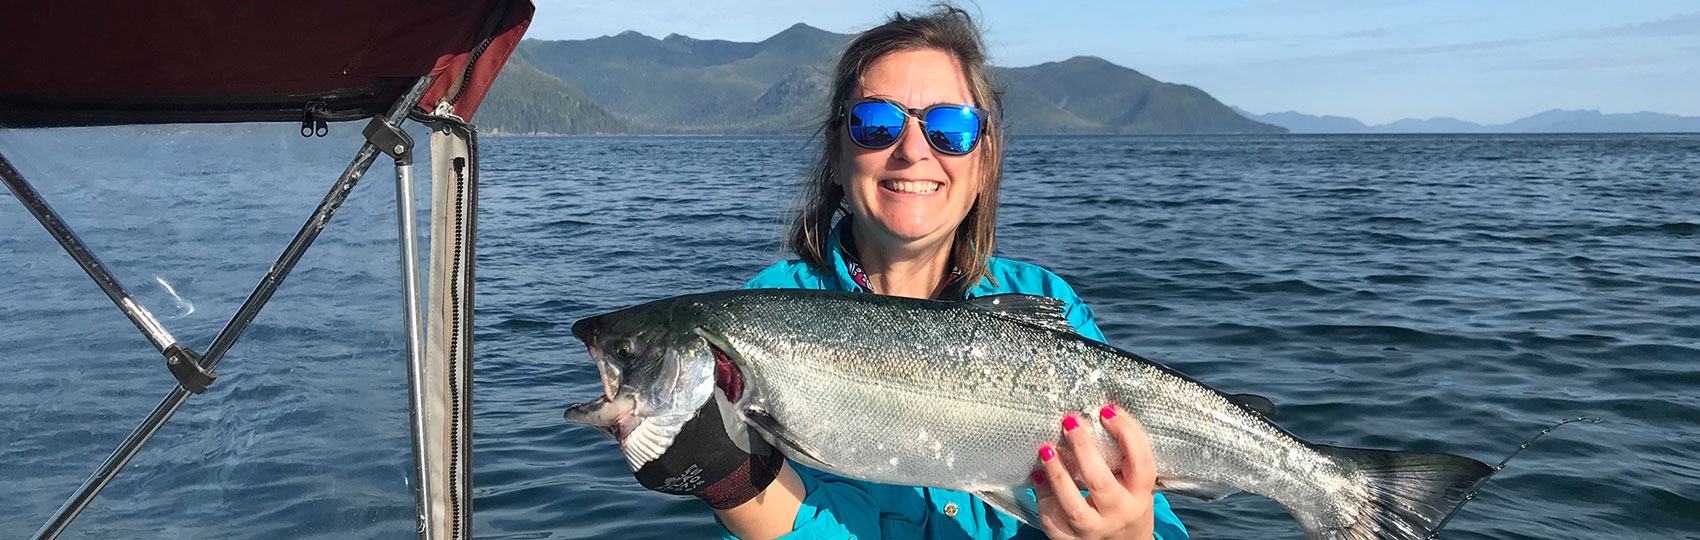 A woman holds up her king salmon catch.